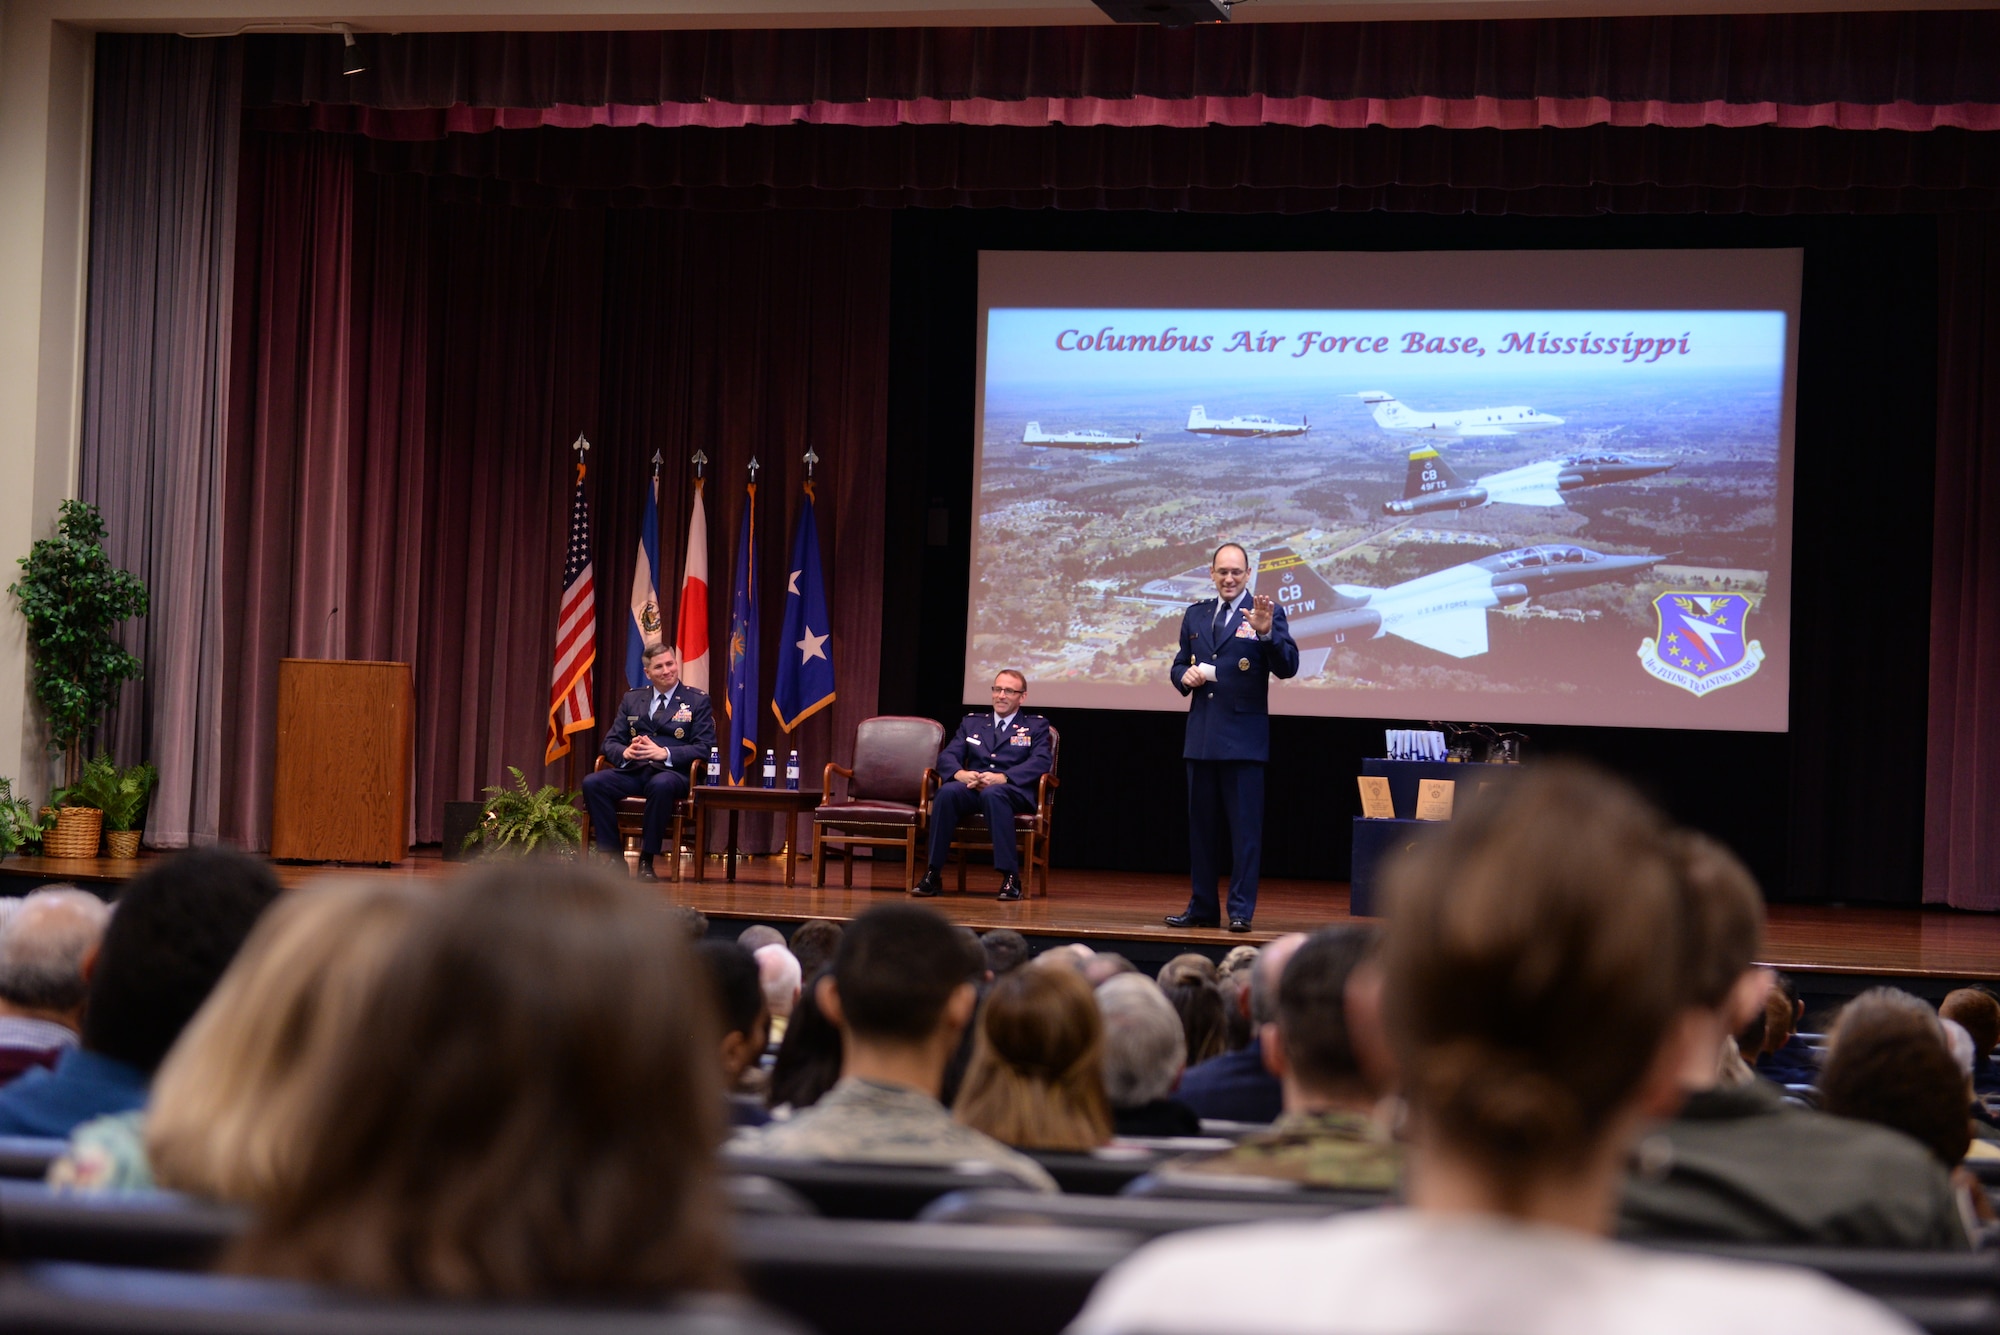 Maj. Gen. Kevin Kennedy, assistant deputy chief information officer, digital transformation and assistant deputy chief of staff for cyber effects operations, speaks during Specialized Undergraduate Pilot Training Class 20-08/09’s graduation ceremony Feb. 28, 2020, at Columbus Air Force Base, Miss. Kennedy has conducted more than more than 3,400 flight hours, including 720 combat hours. (U.S. Air Force photo by Airman Davis Donaldson)